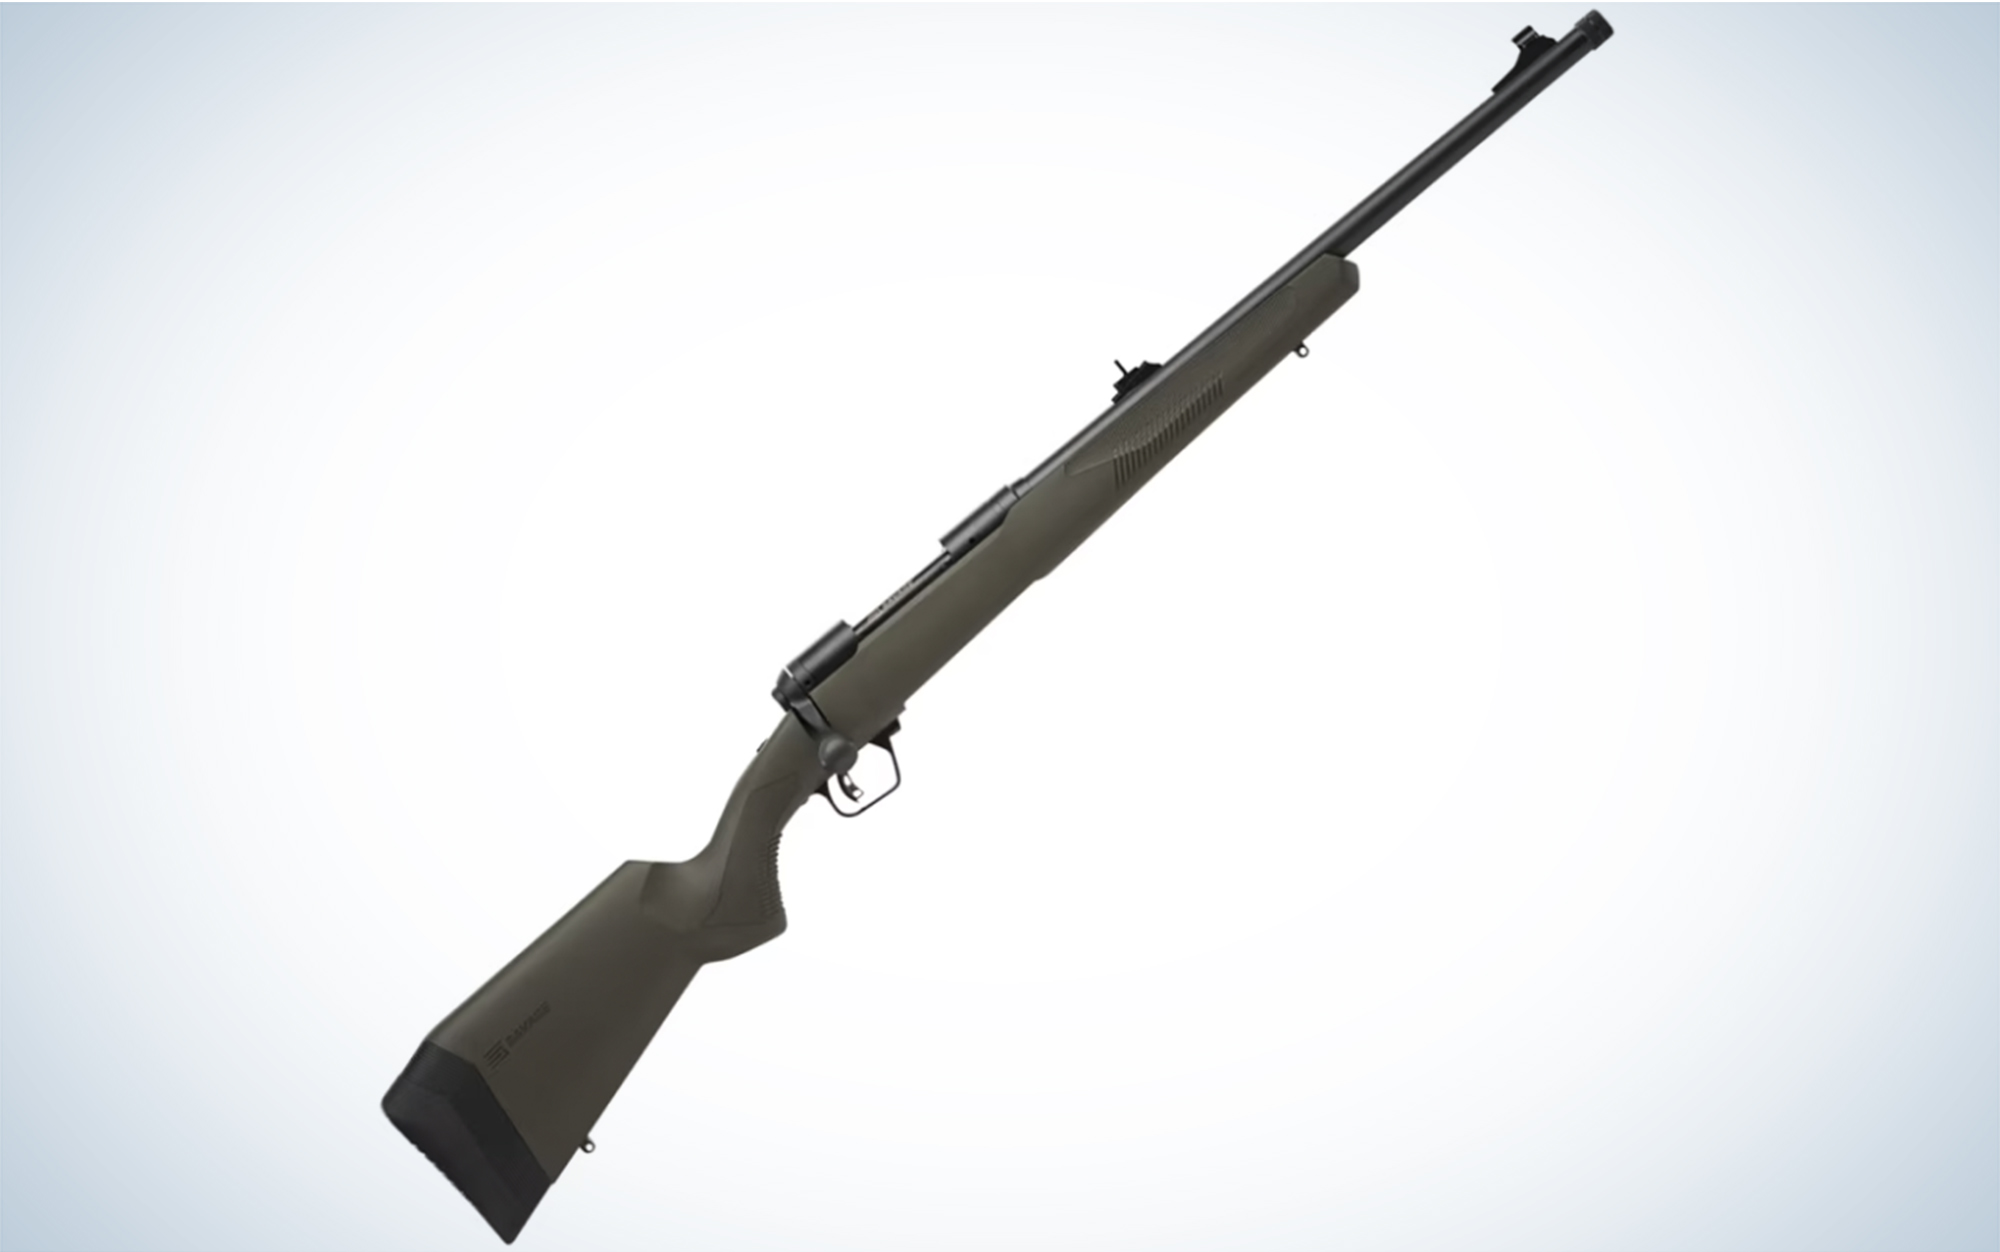 The Savage 110 Hog Hunter is one of the best guns for hog hunting.